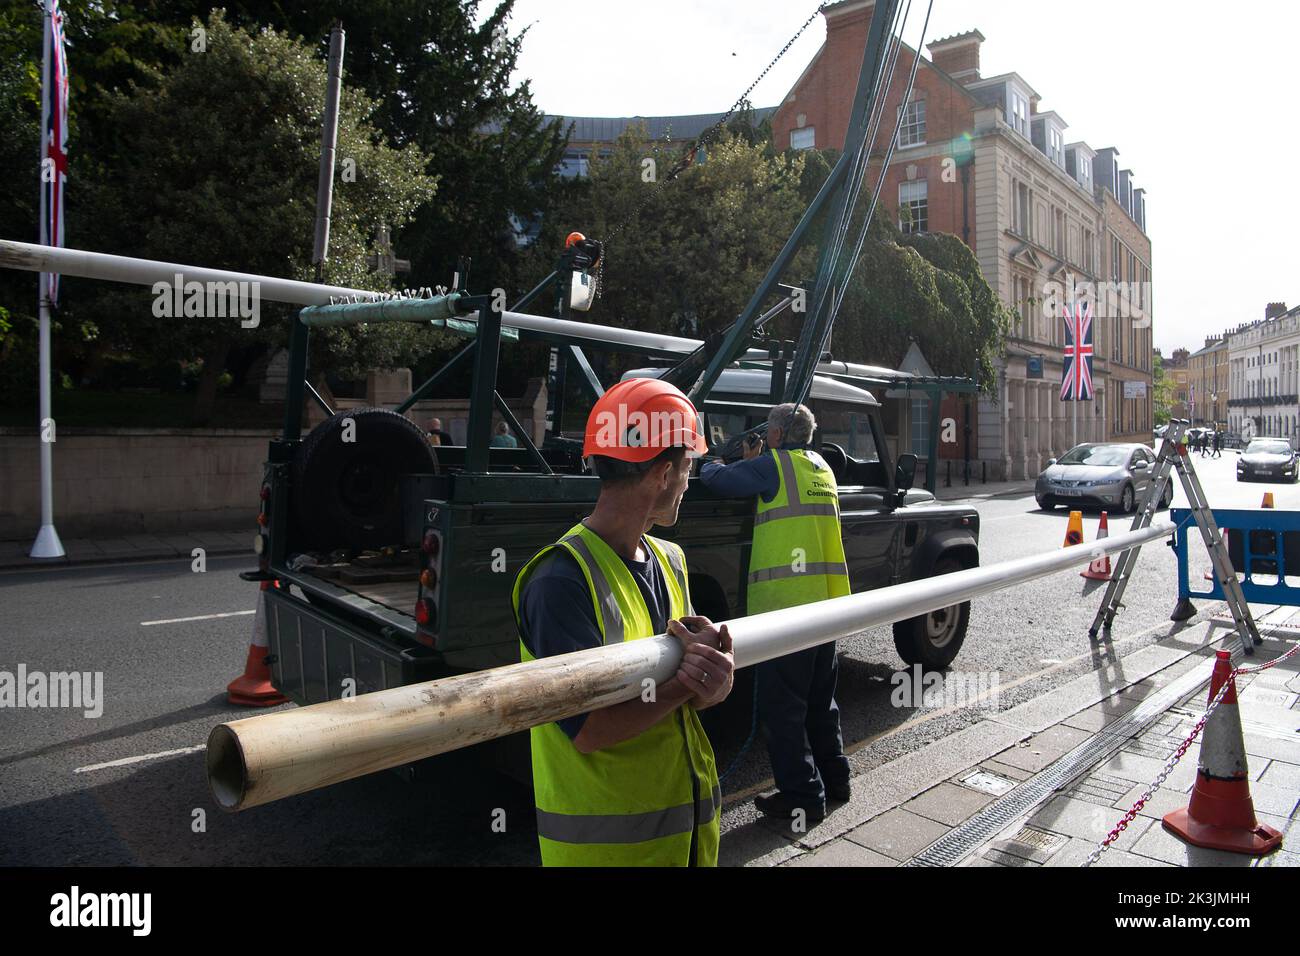 Windsor, Berkshire, UK. 27th September, 2022. Following the death of Her Majesty the Queen, the Royal Mourning period has now ended and so the ceremonial Union Jacks that had been installed around Windsor for the Royal Funeral, were being taken down today. Credit: Maureen McLean/Alamy Live News Stock Photo